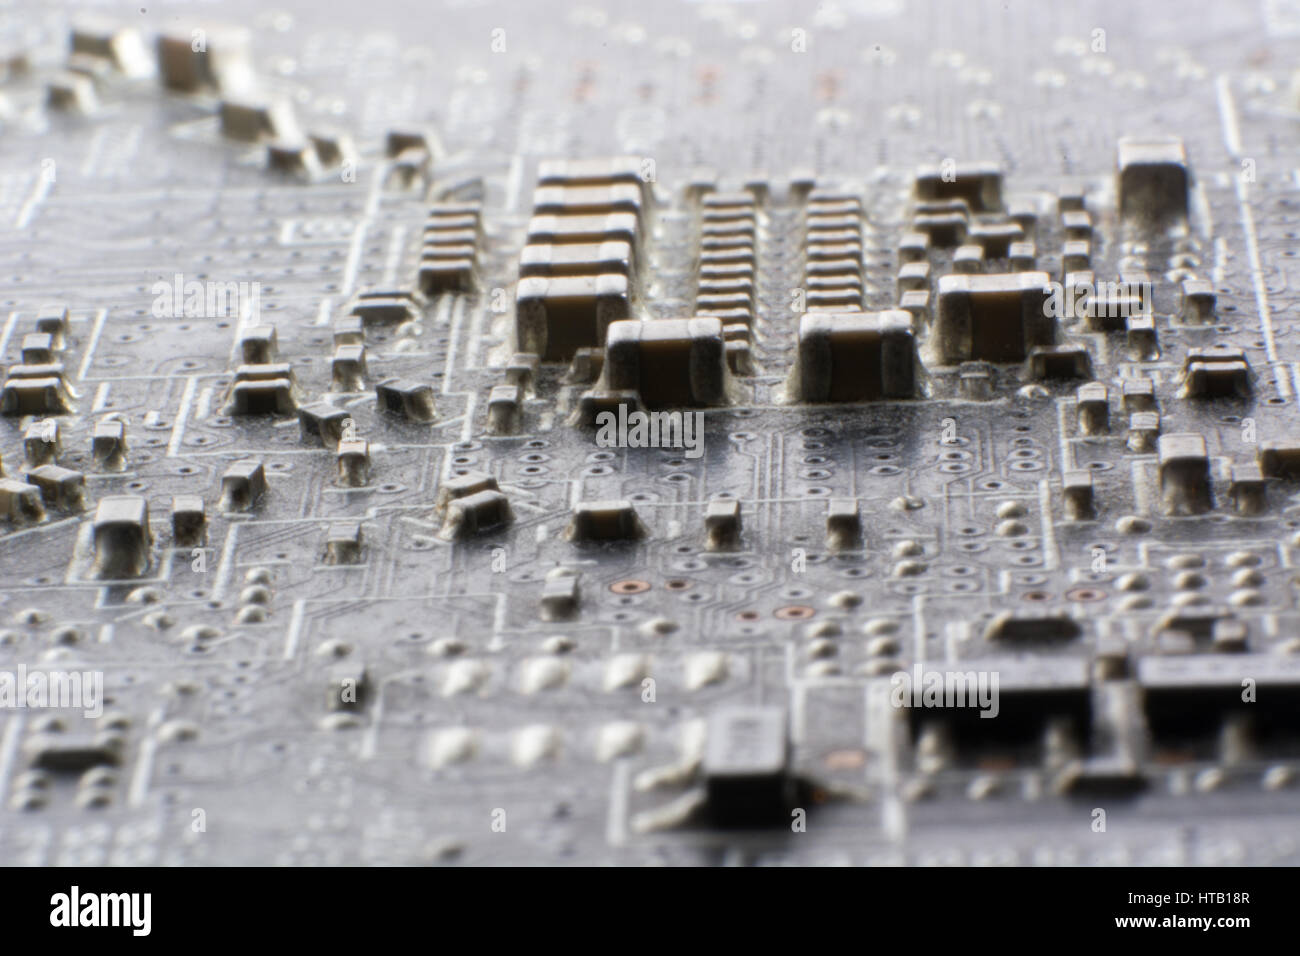 Surface-mount dusty smd components on used electronic circuit board close-up. Stock Photo